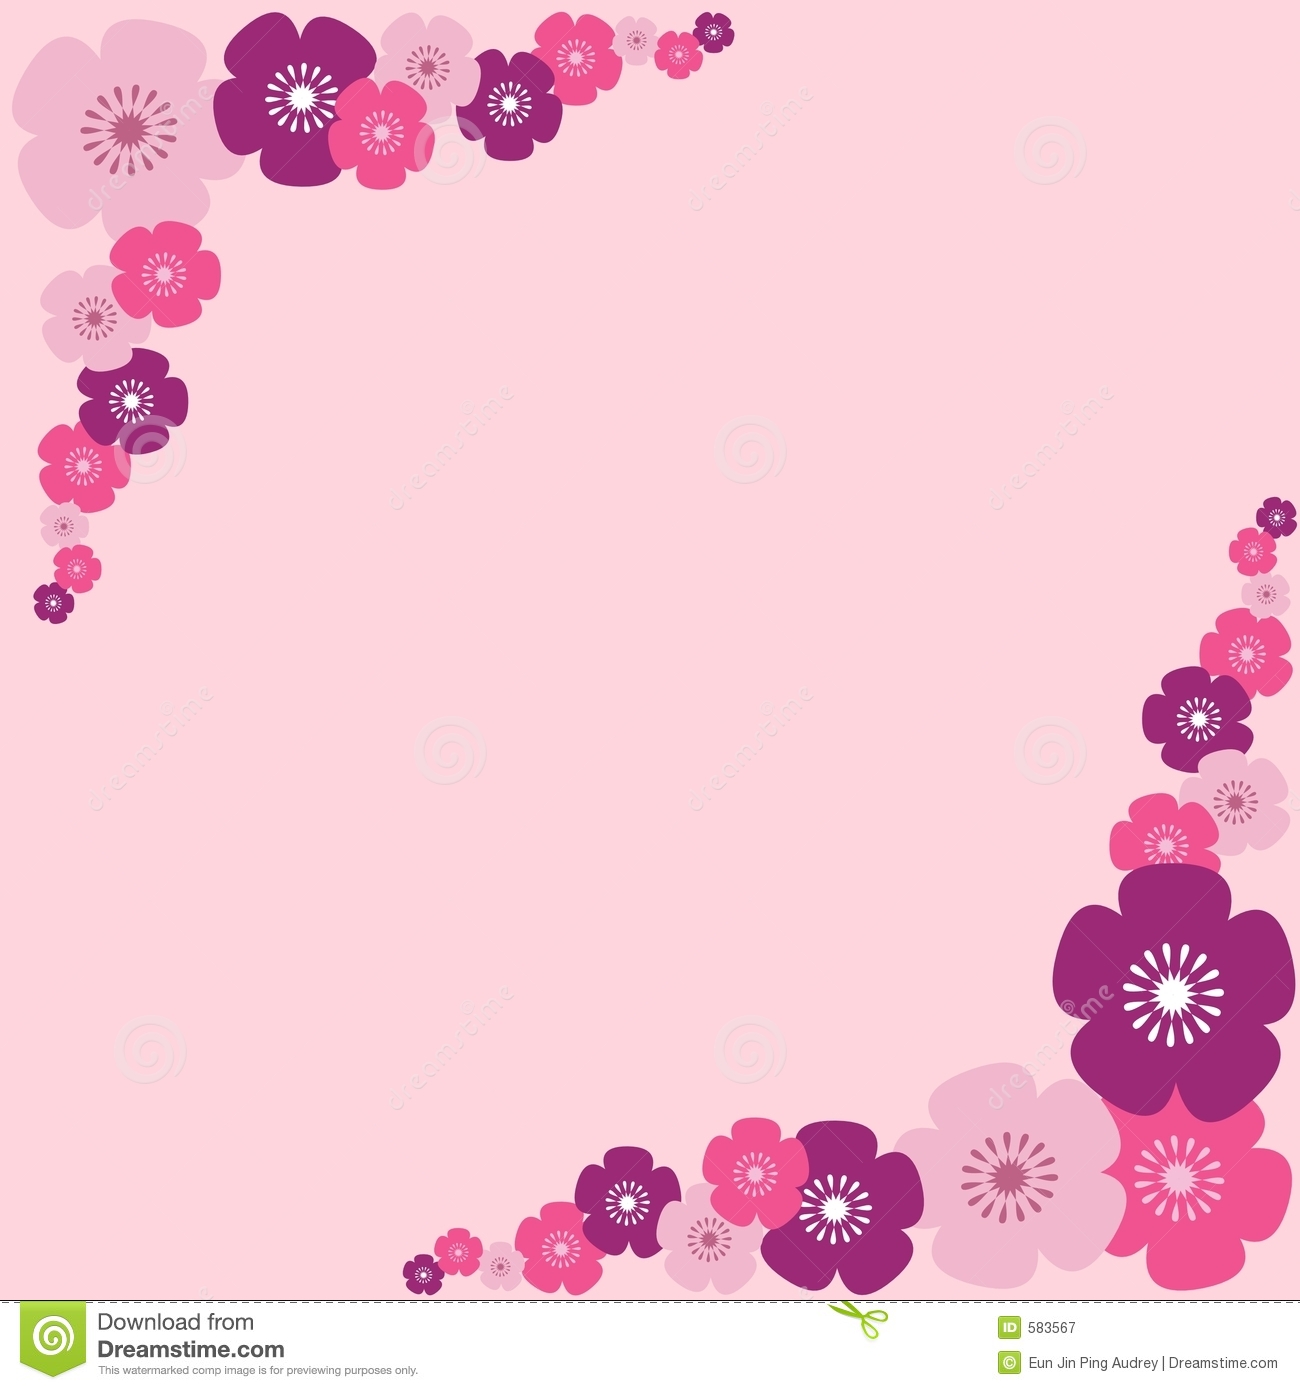 Pink Flowers Border Royalty Free Stock Photography   Image  583567